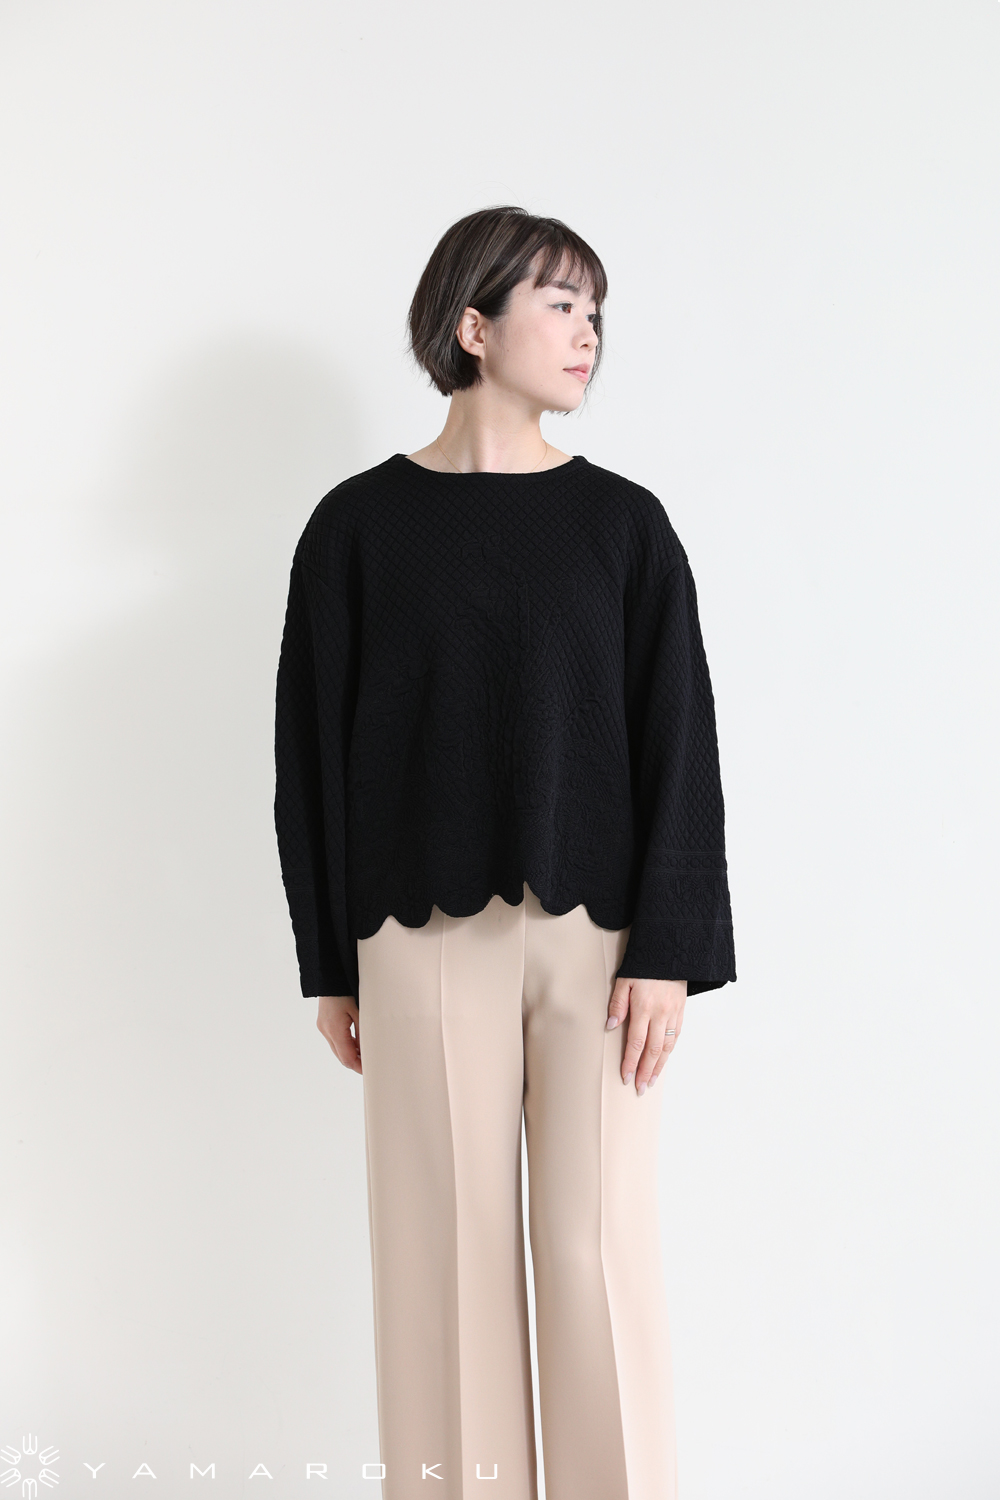 mame spring knitted pullover サイズ1 www.busbycabinets.com